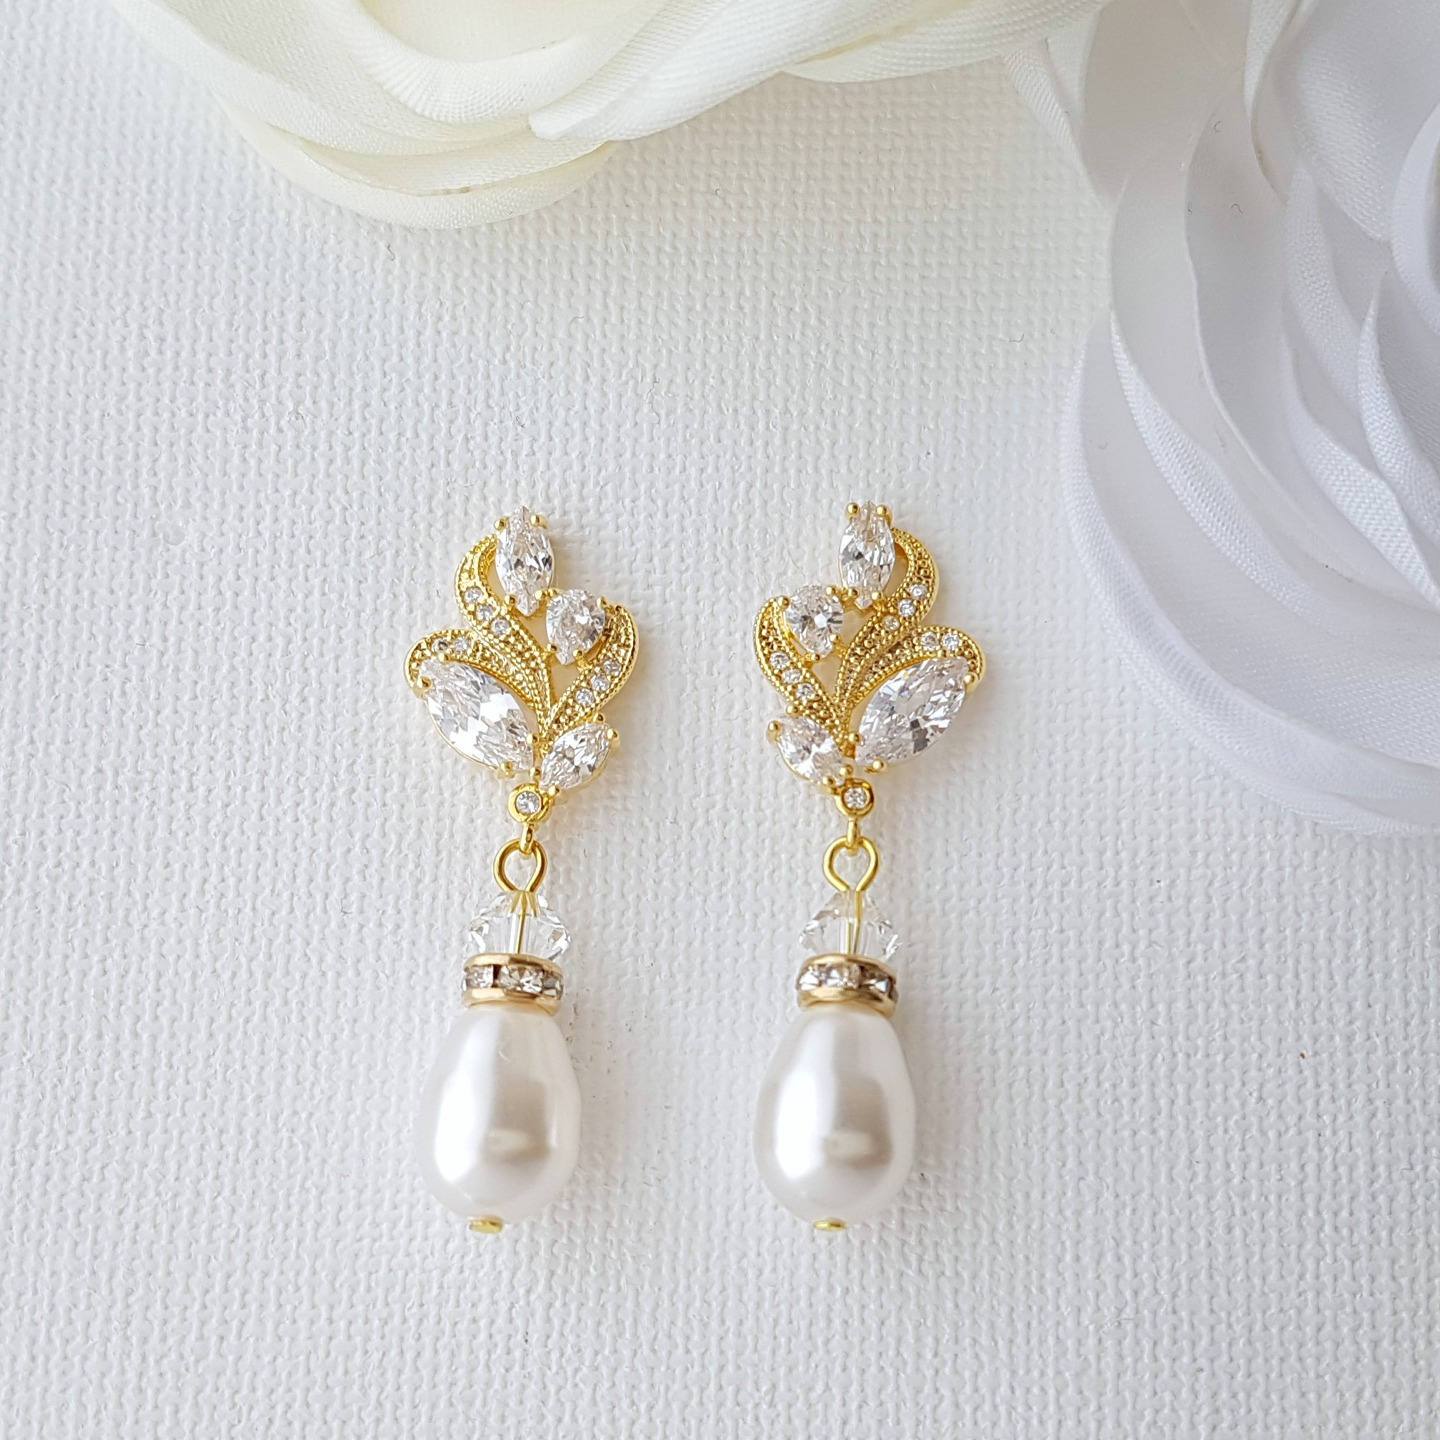 Crystal and Pearl Drop Earrings - Silver & Gold - Marianna – Honey Willow -  handmade jewellery